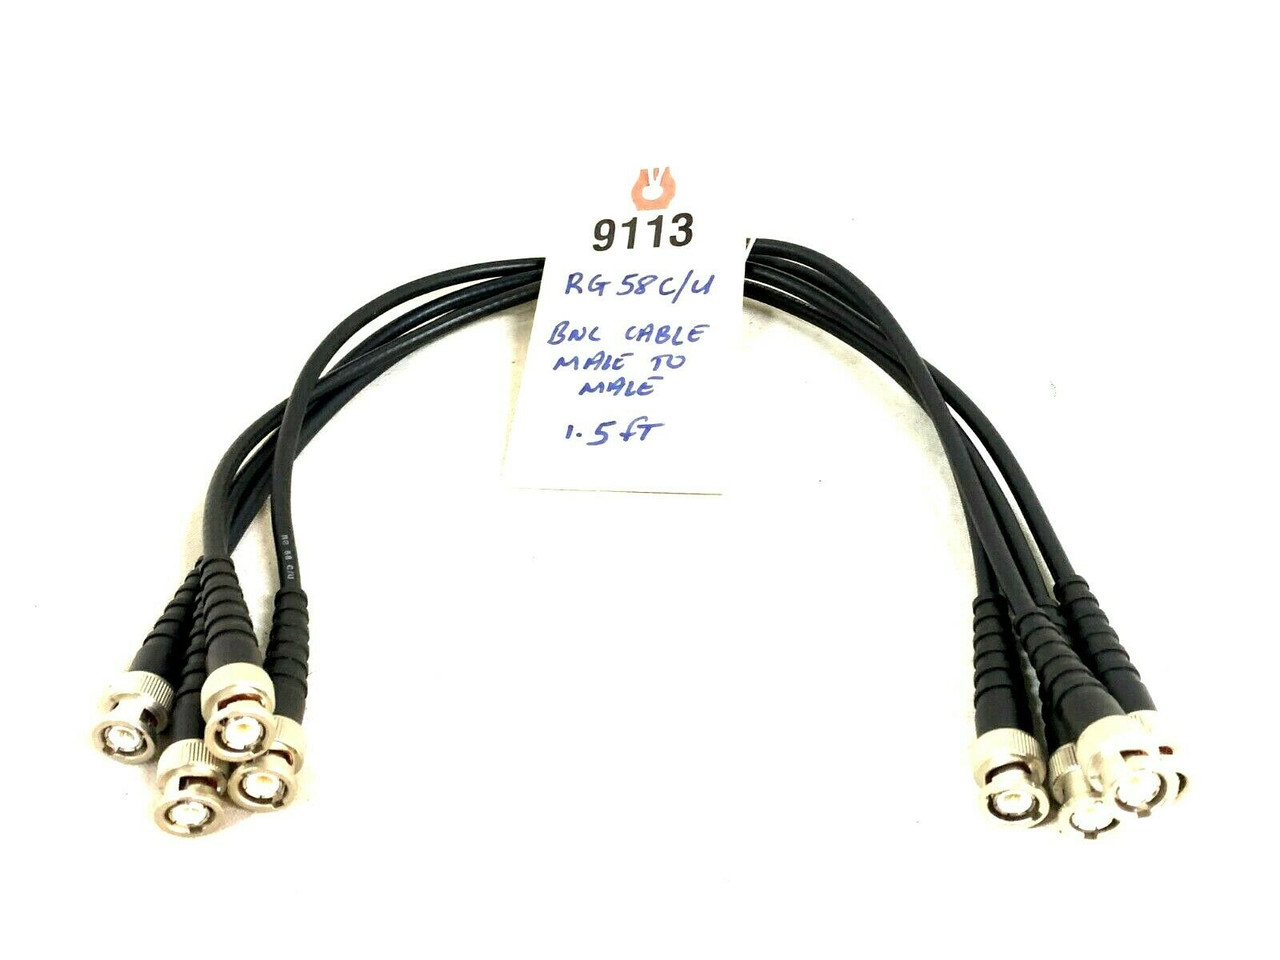 General 1.5' RG58C U Male to Male BNC Cable -9113 (One) - True Heart Sound